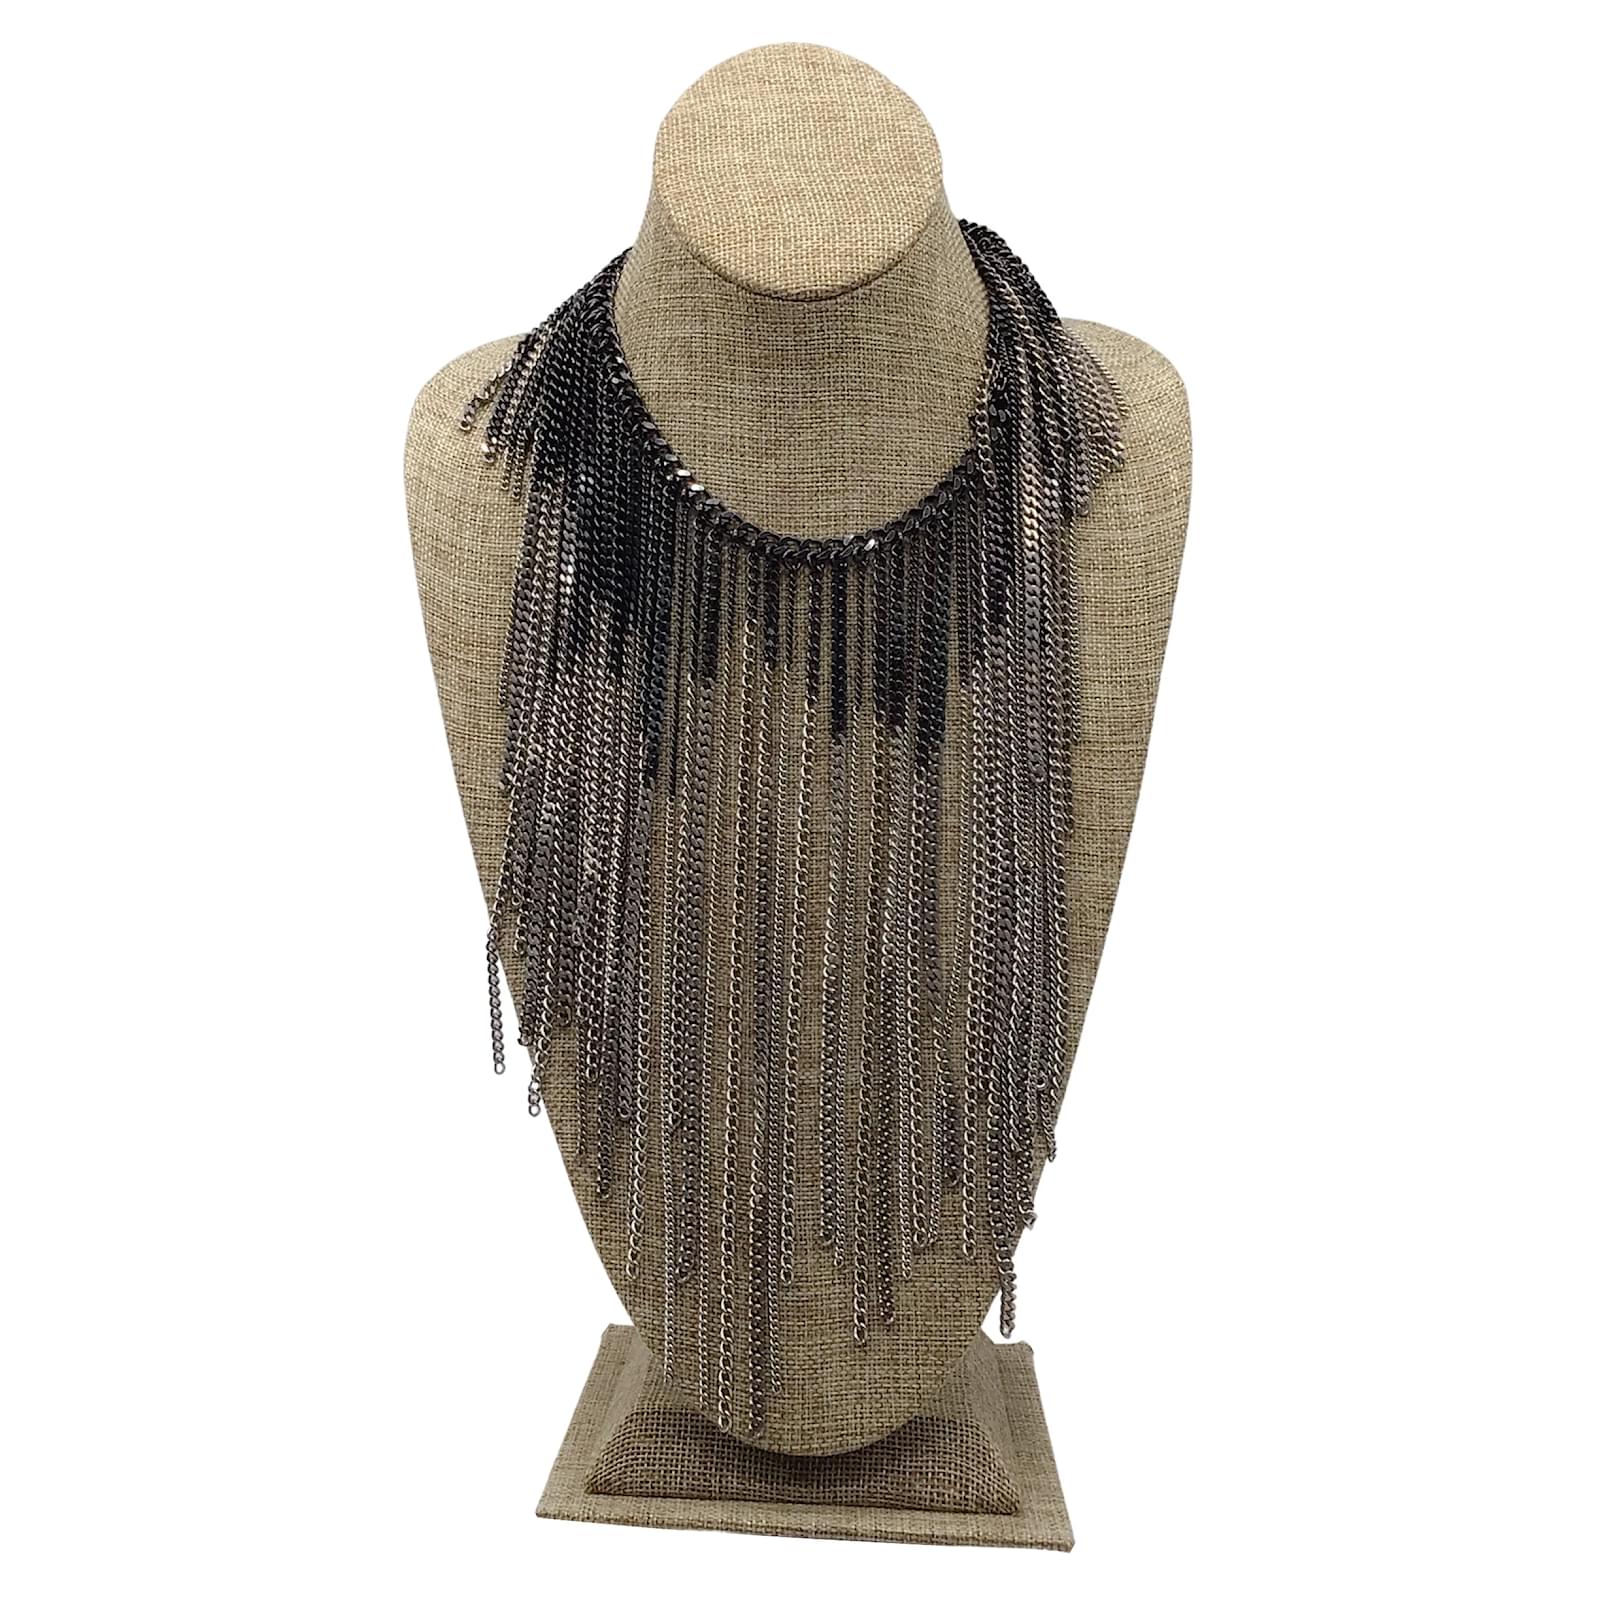 Chanel 'CC' Pearl and Fringe Embellished Necklace